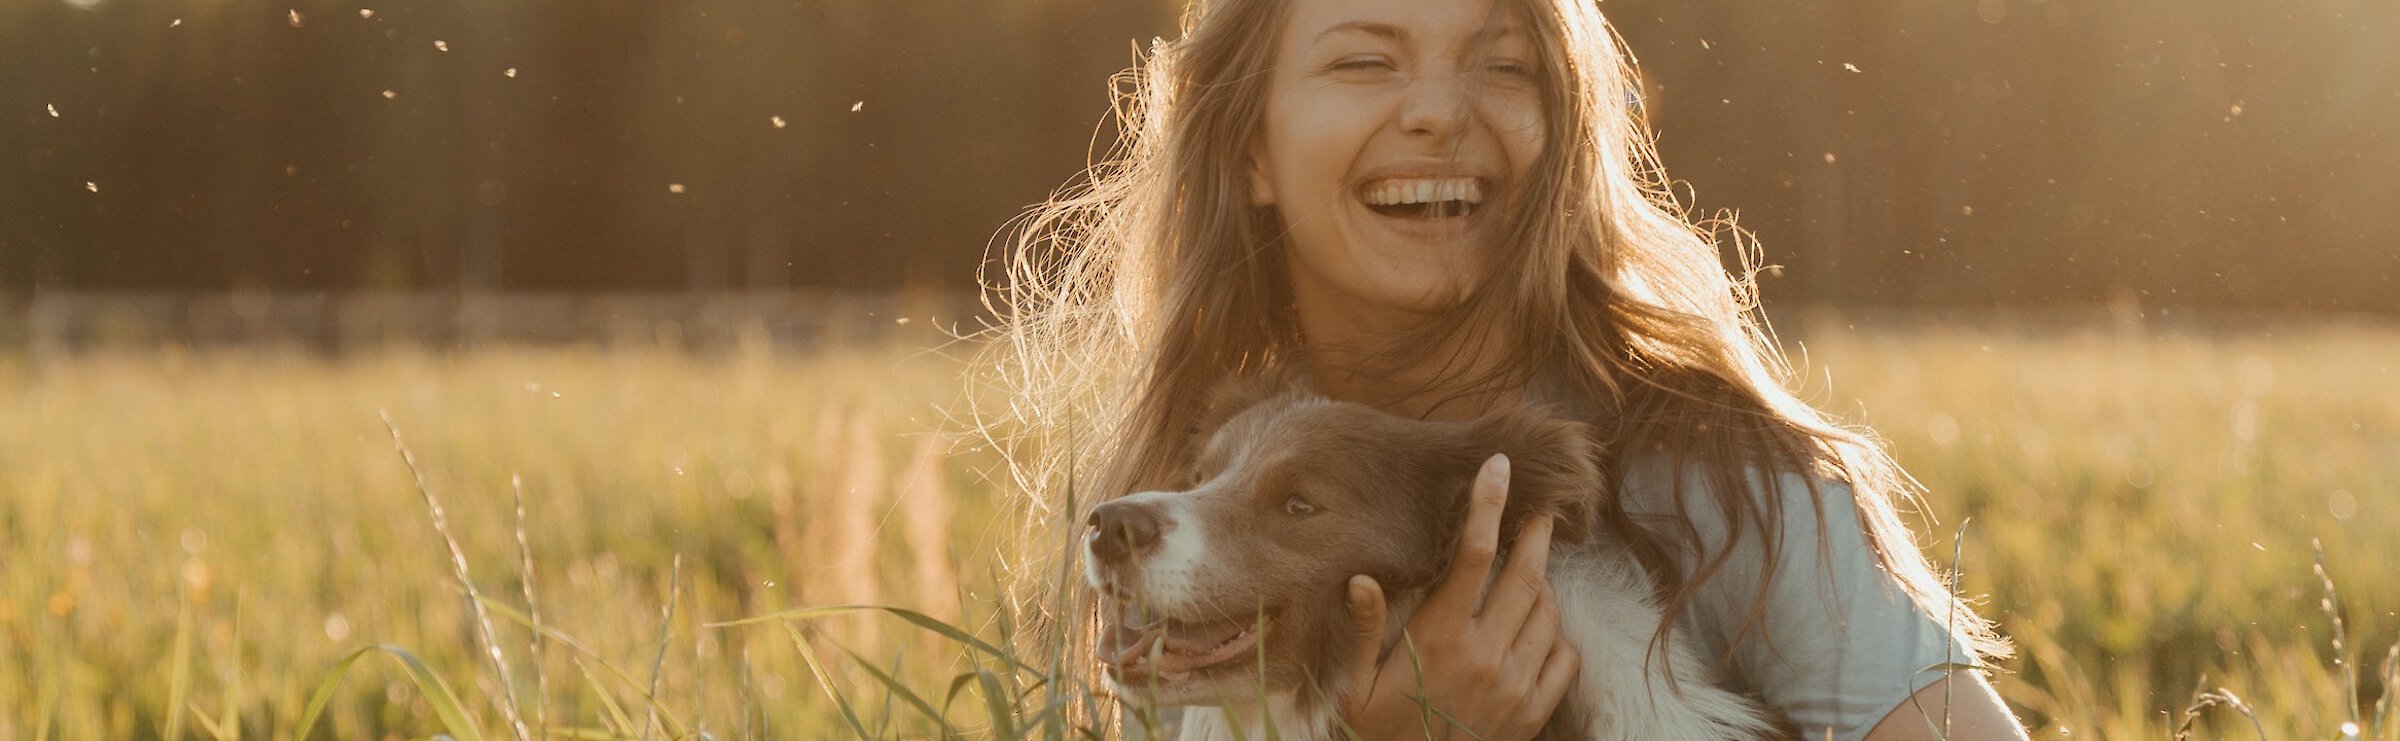 Laughing woman and her dog in a field